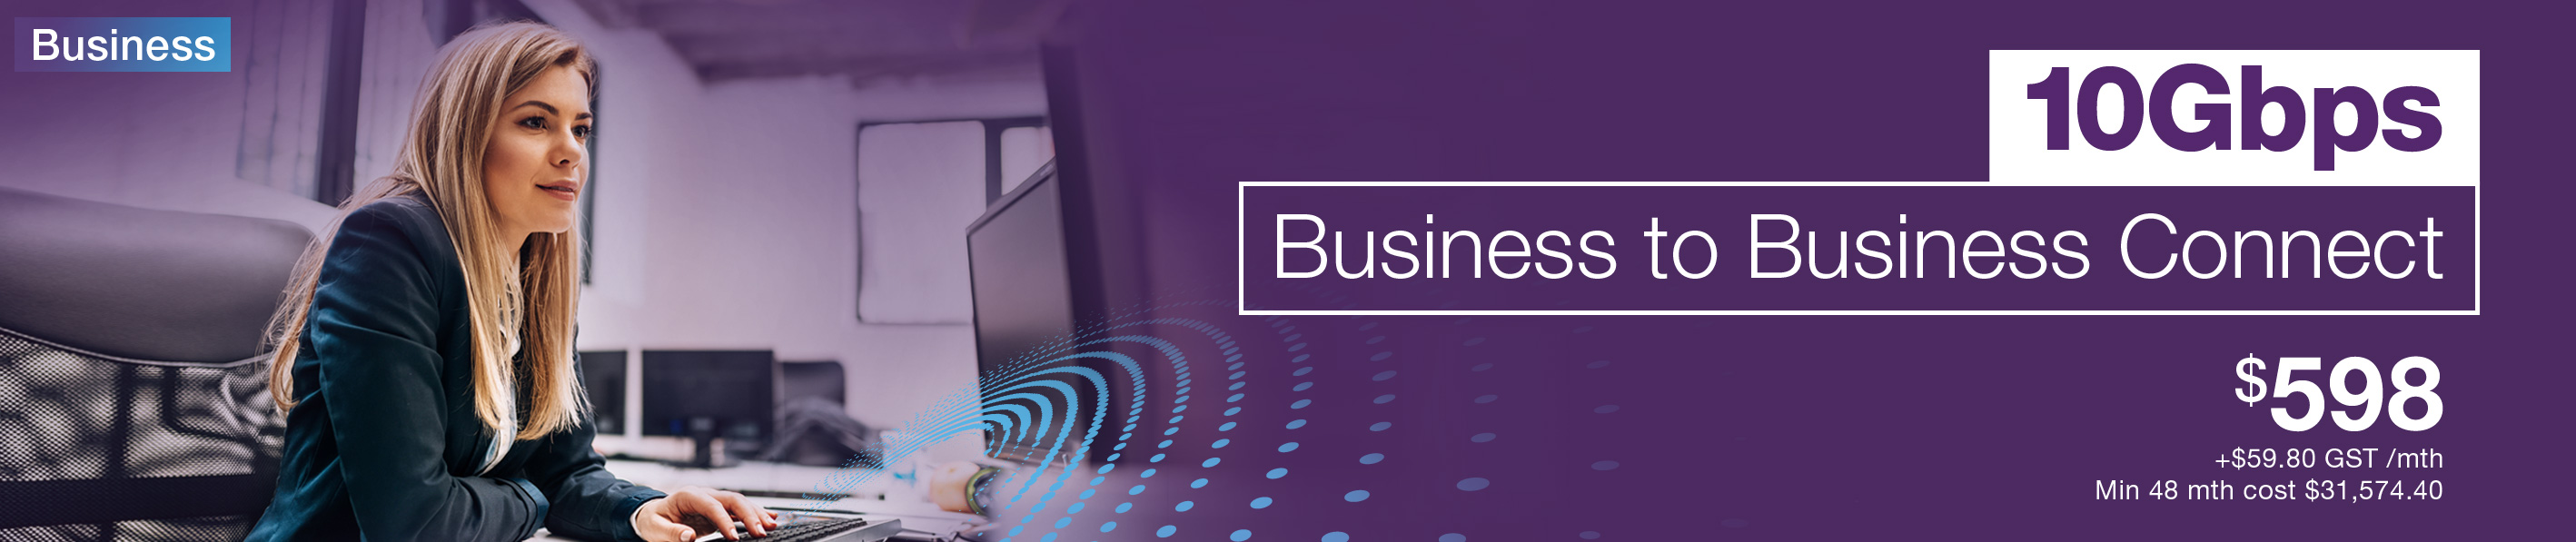 10Gbps Business to Business Connect